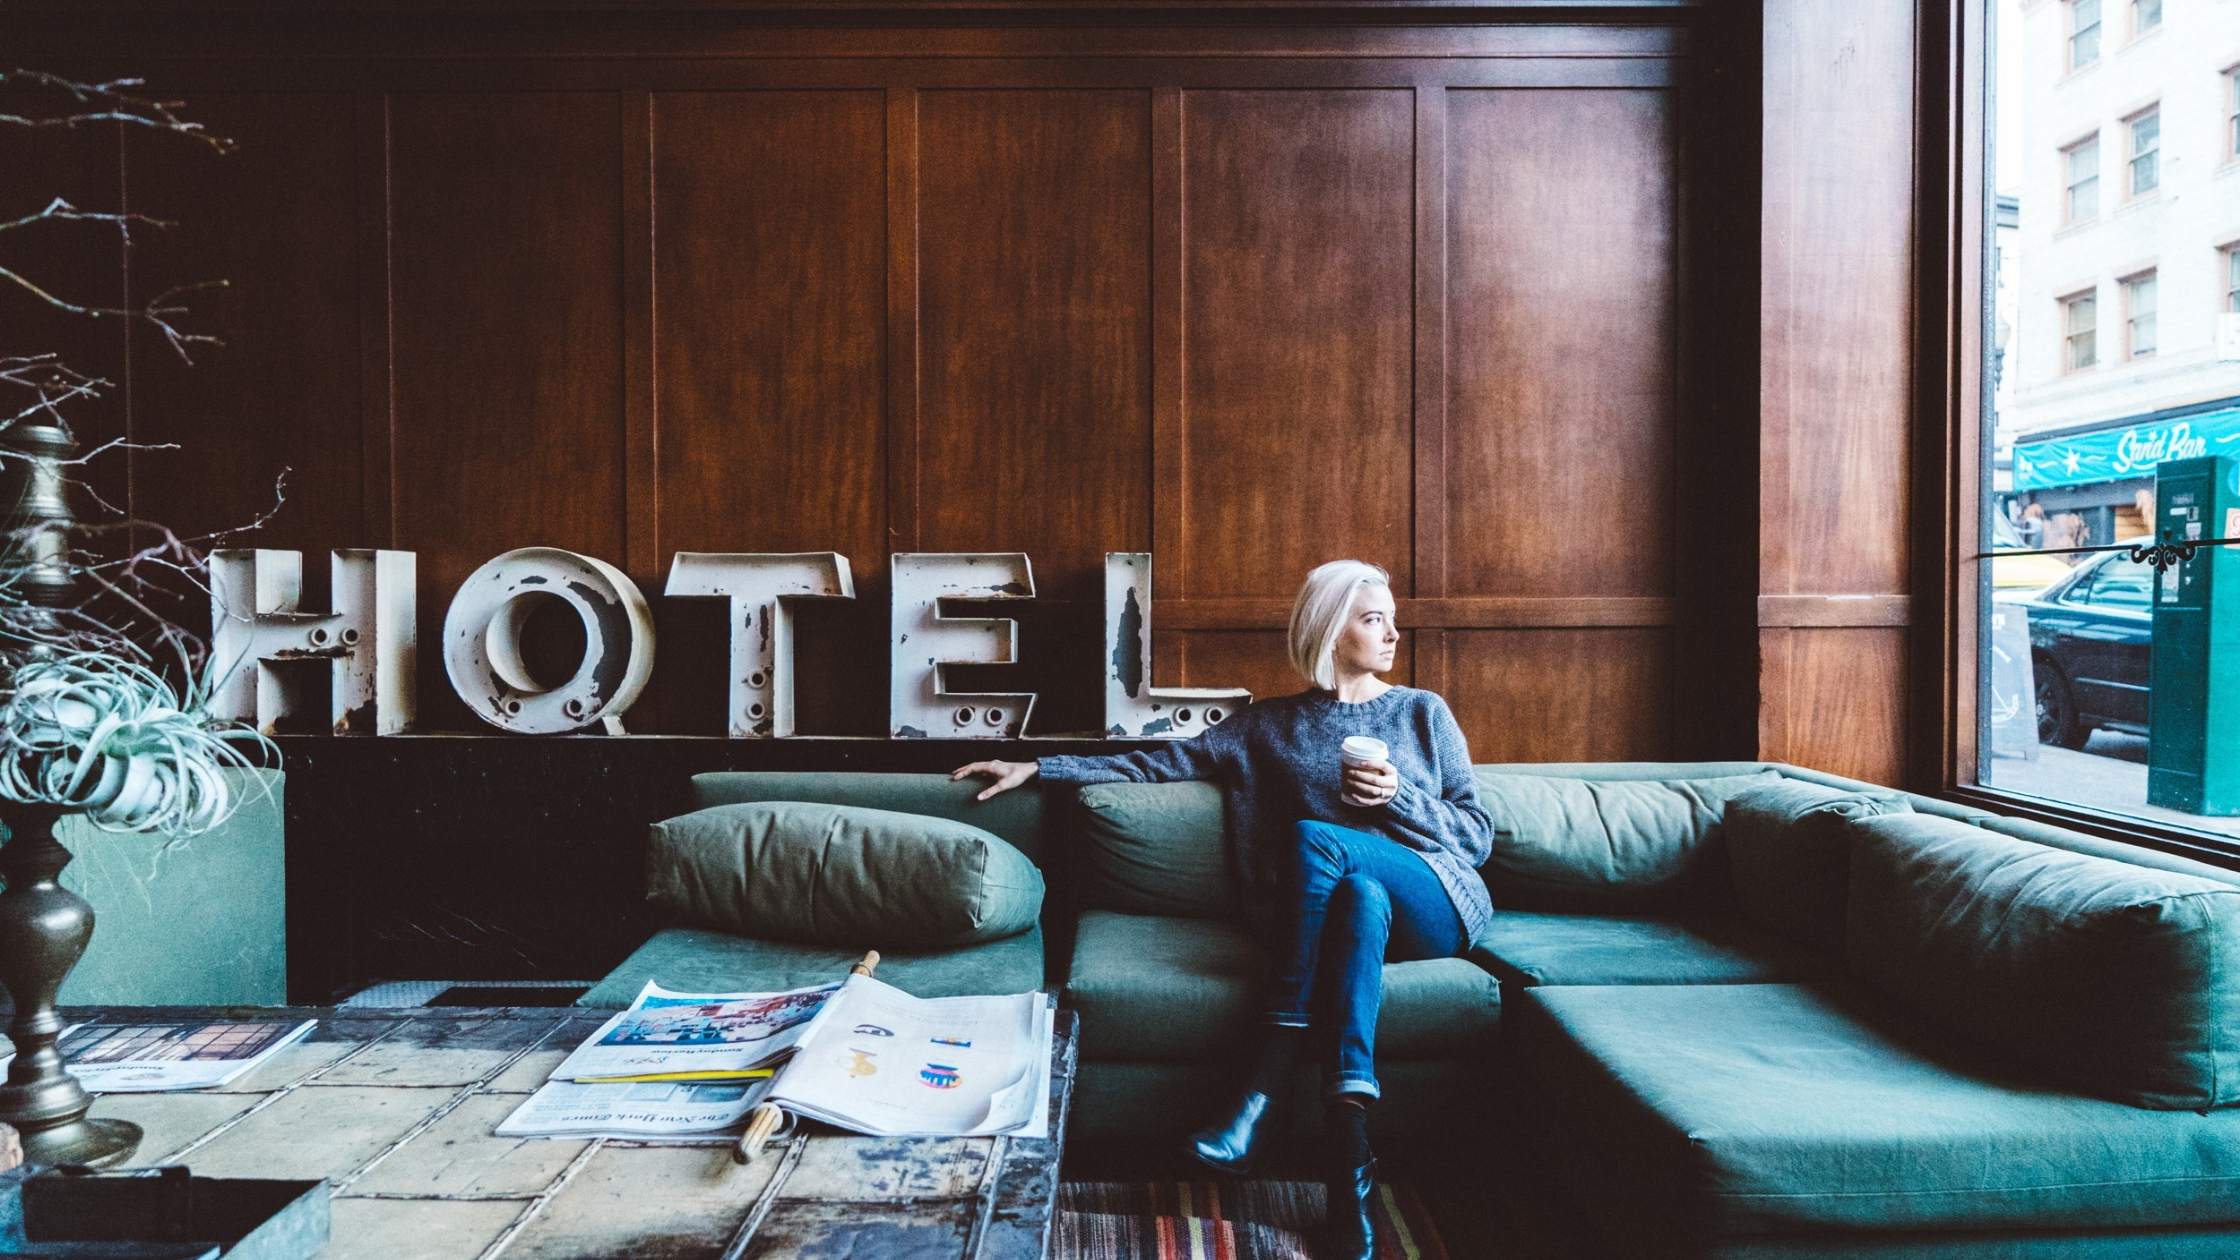 How to Increase Hotel Occupancy in Low Season